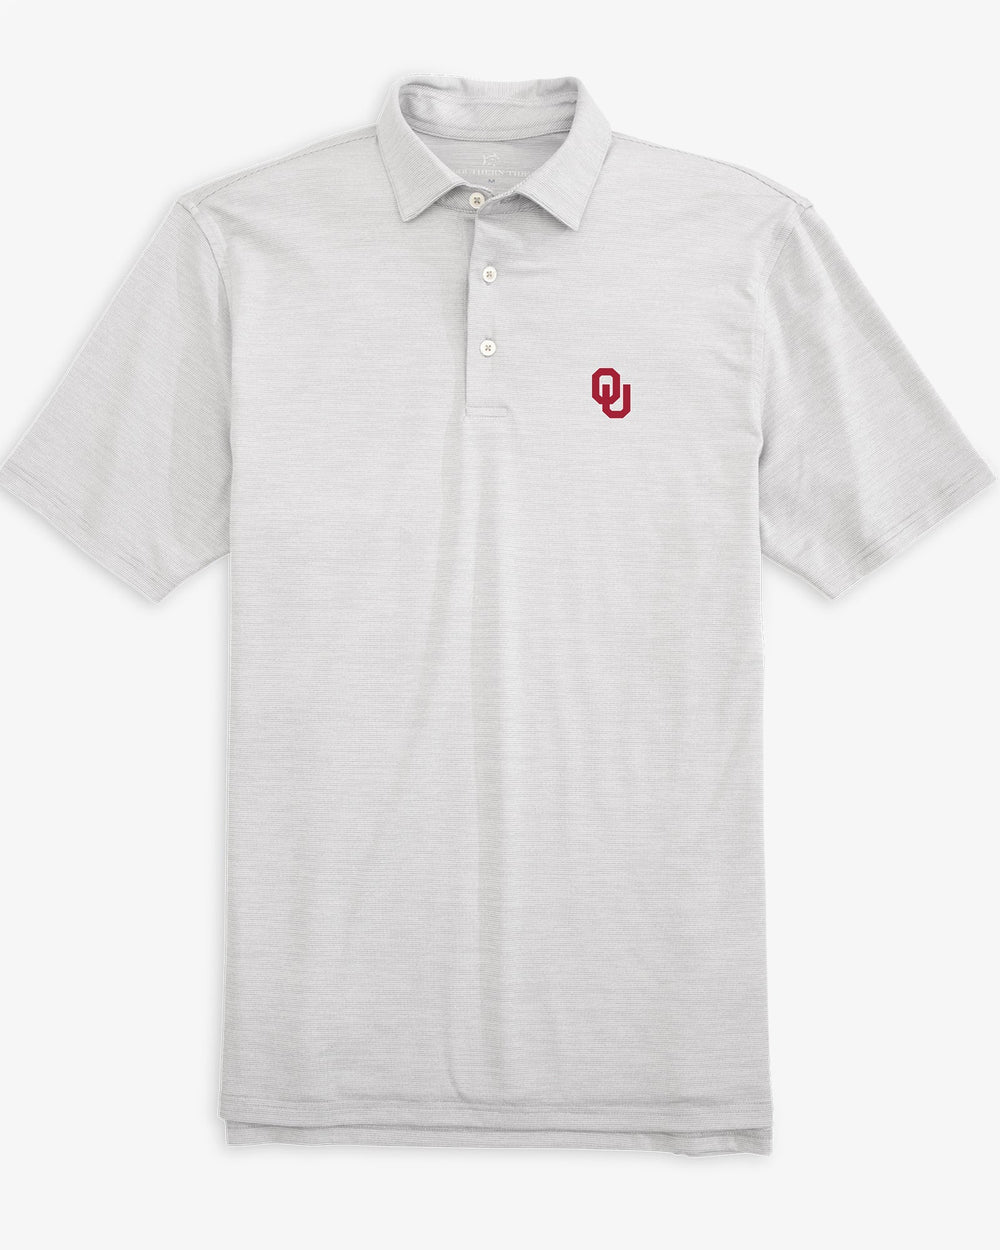 The front view of the Oklahoma Sooners Driver Spacedye Polo Shirt by Southern Tide - Slate Grey